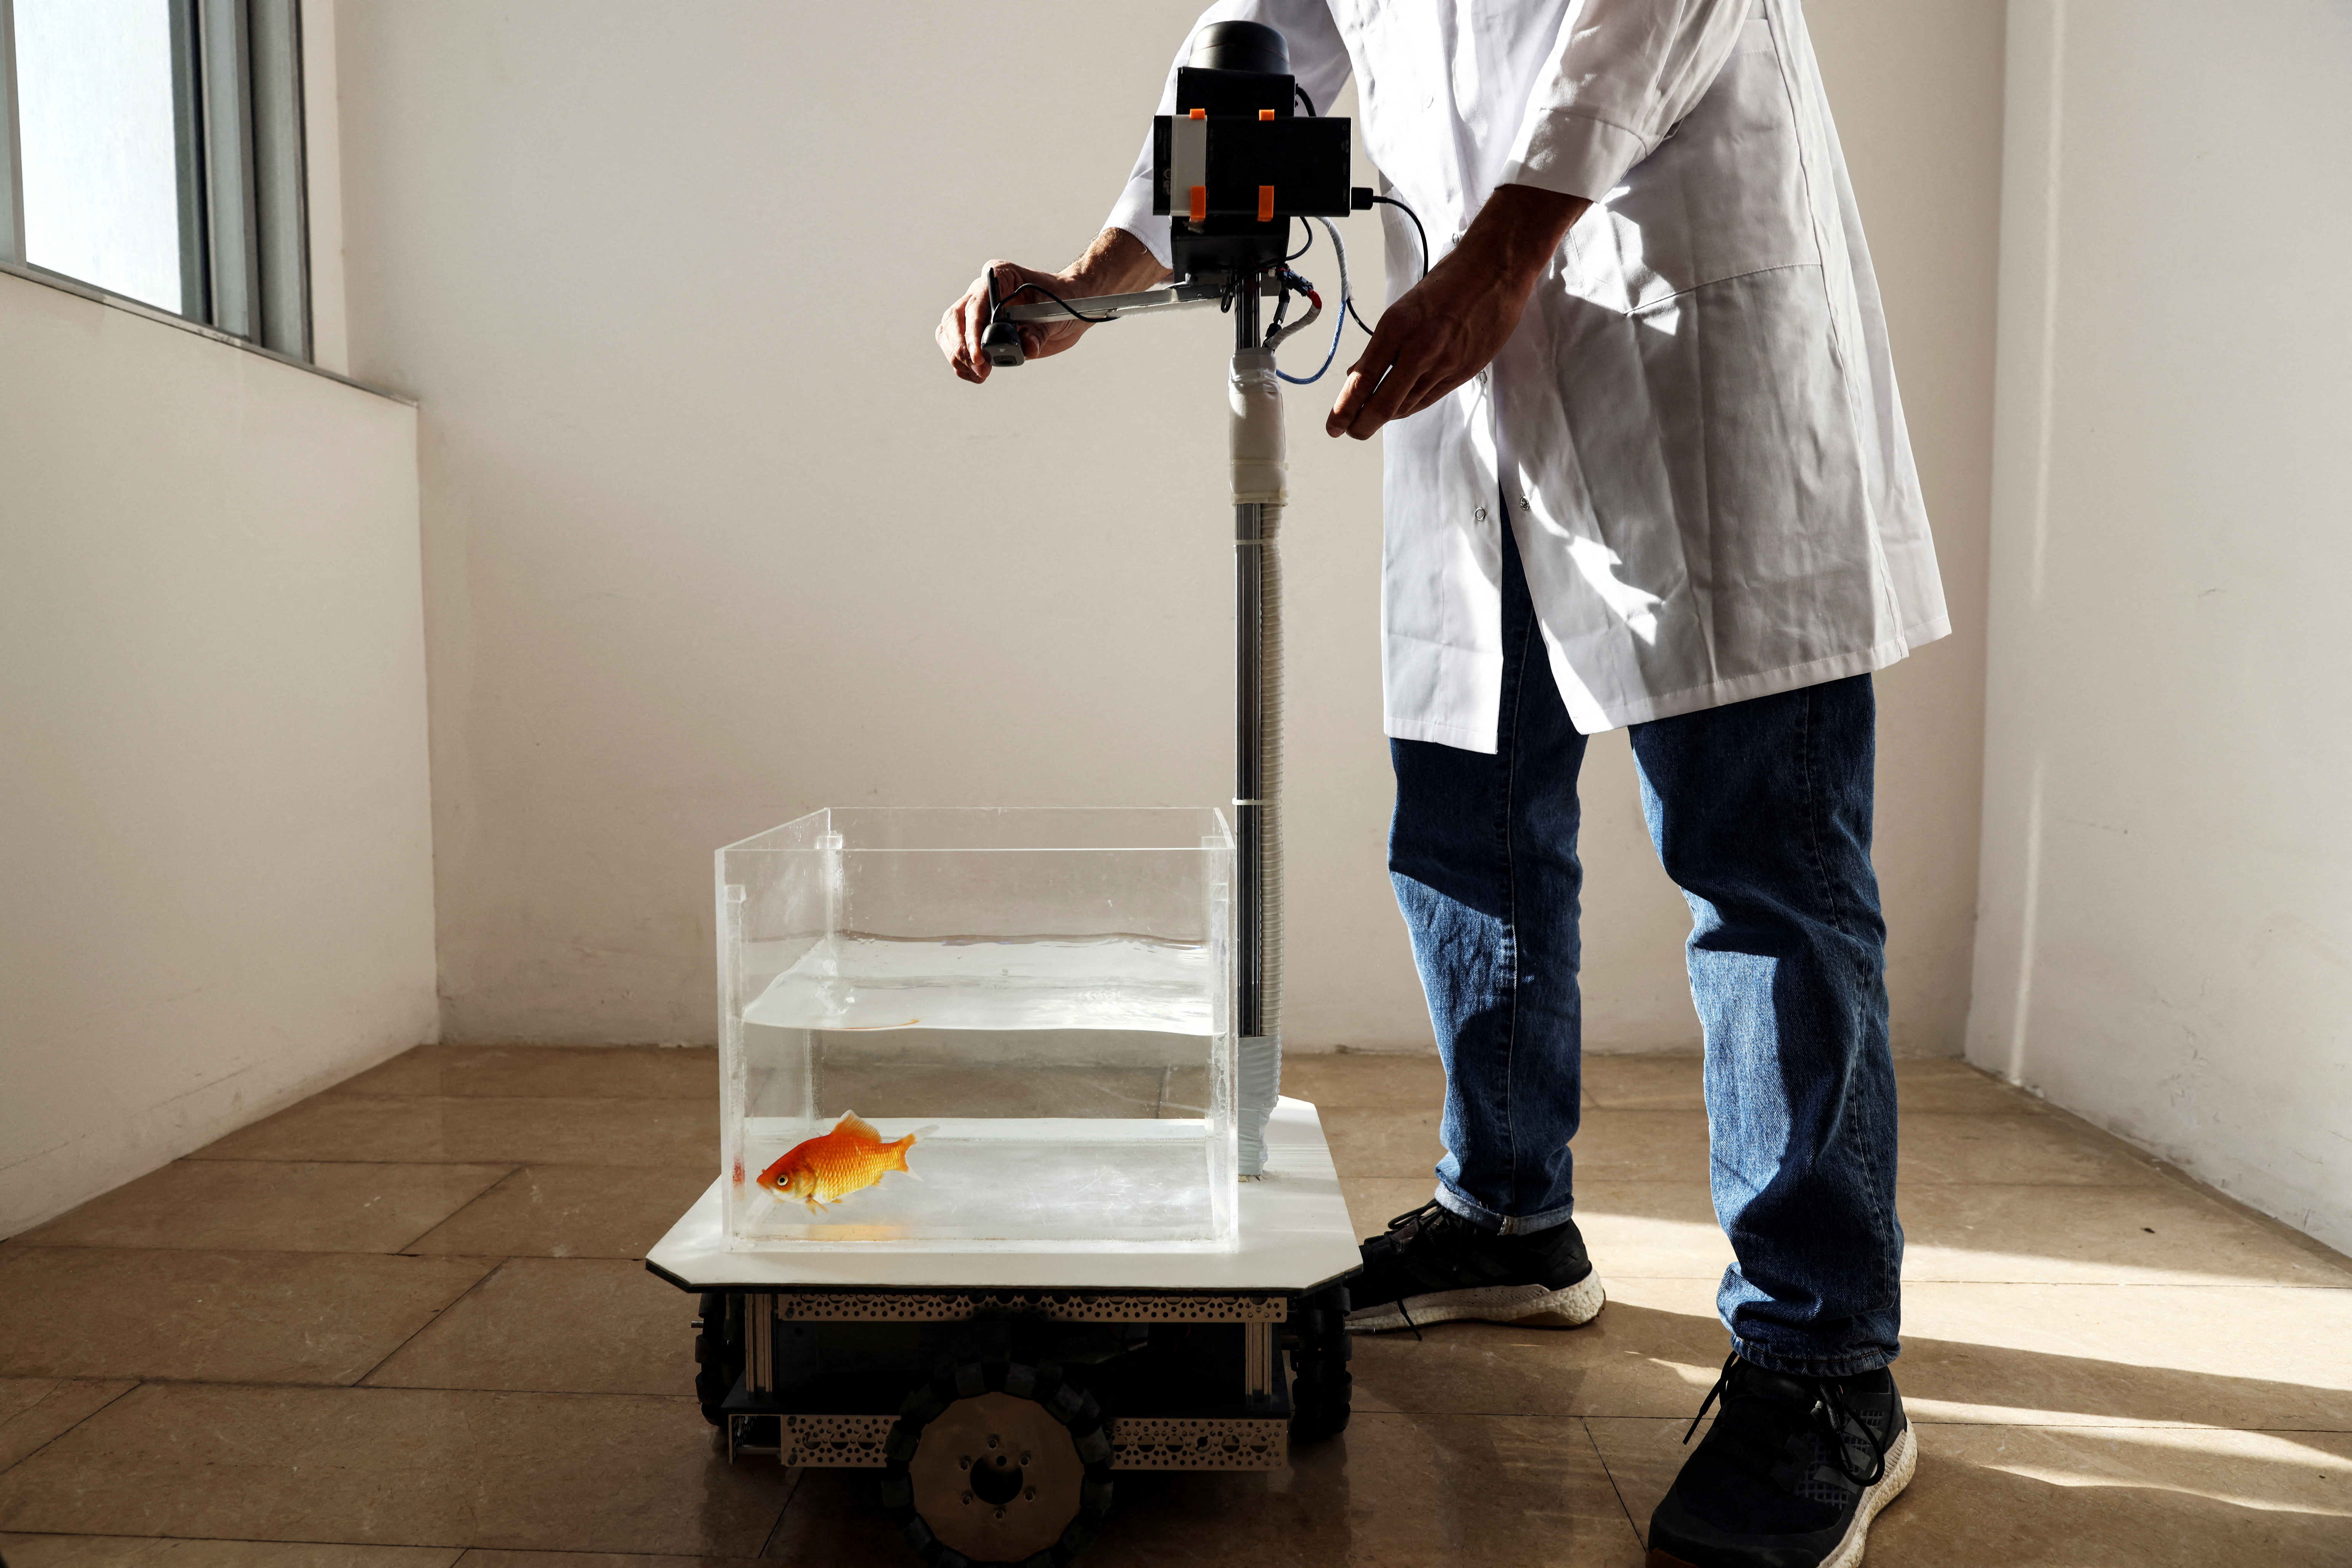 A researcher adjusts a fish-operated vehicle navigated by a goldfish, developed at Ben-Gurion University in Beersheba, Israel, January 6, 2022. REUTERS/Ronen Zvulun